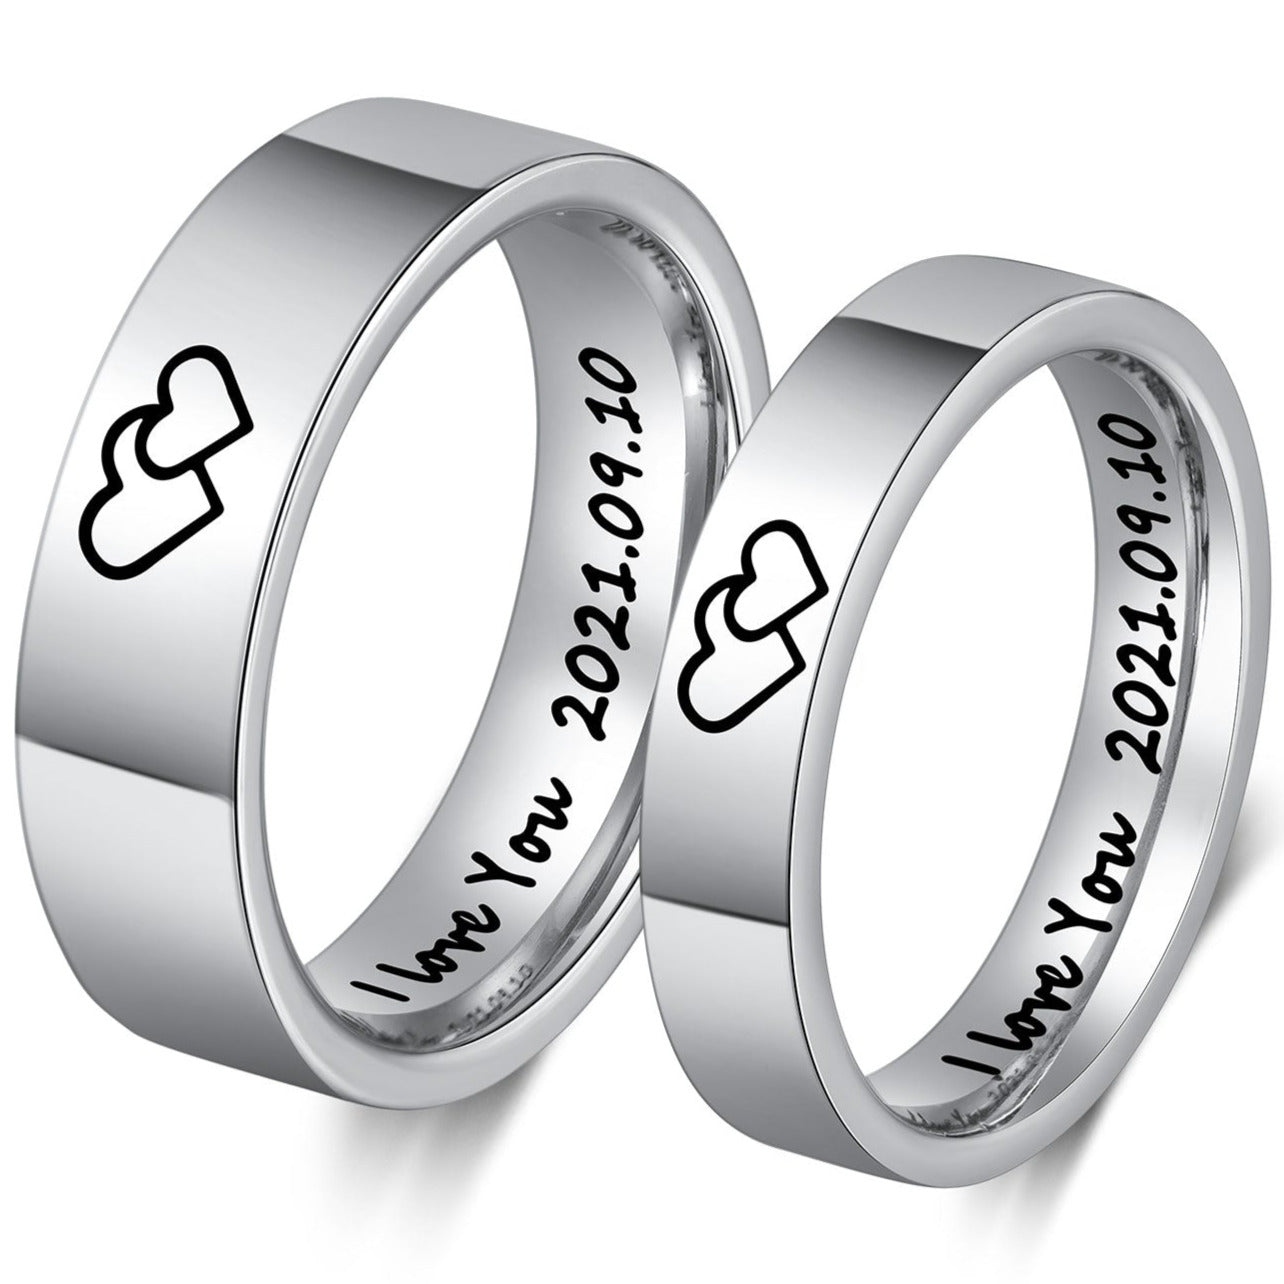 Think Engraved wedding Ring 7 / 6 Personalized His and Hers Traditional Promise Ring or Wedding Ring Set Couples Rings